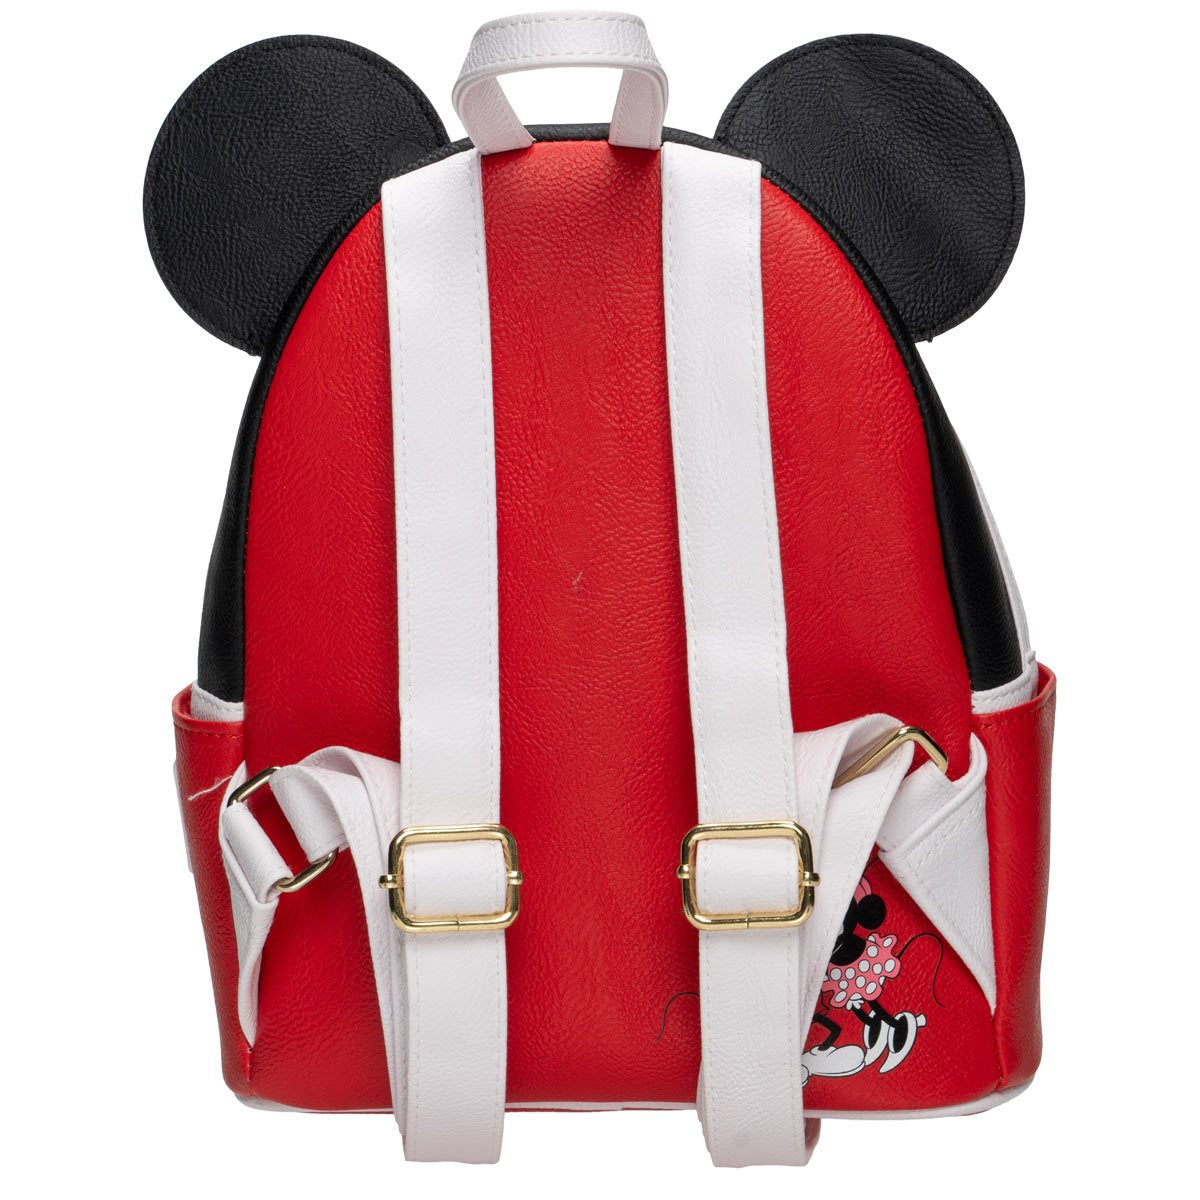 Loungefly Mickey Mouse Valentine Mini Backpack